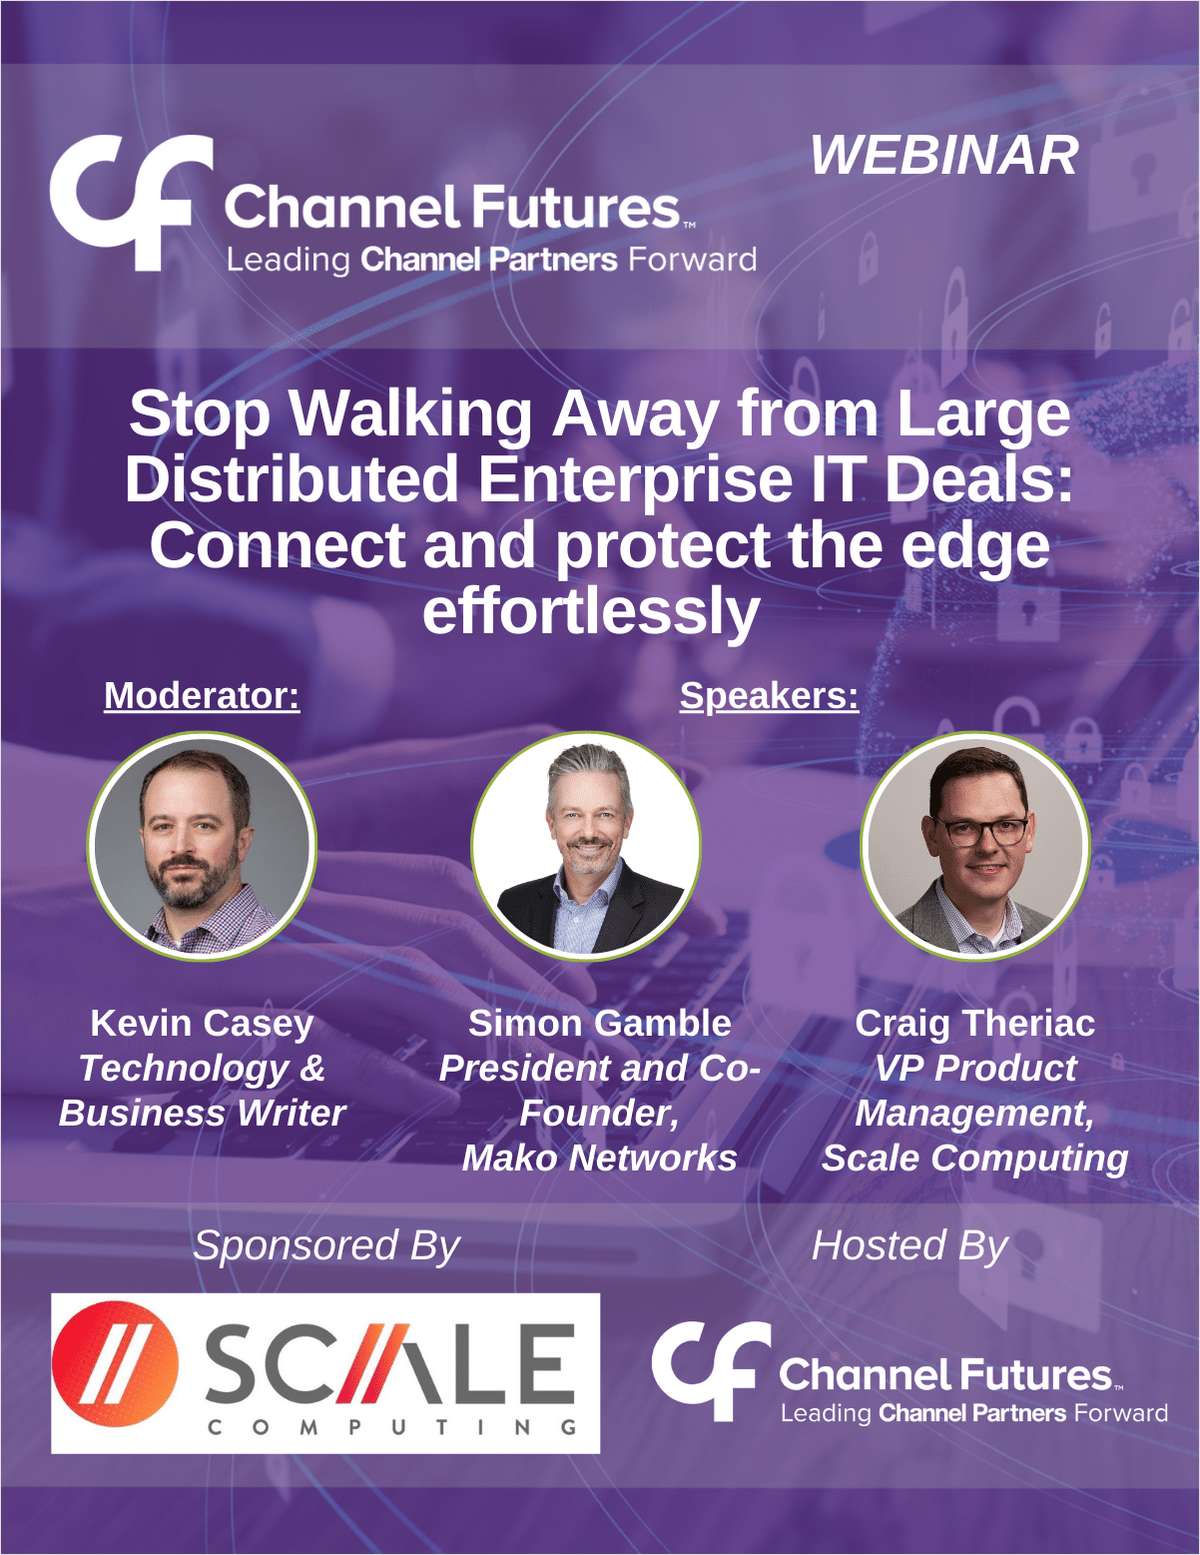 Stop Walking Away from Large Distributed Enterprise IT Deals: Connect and protect the edge effortlessly